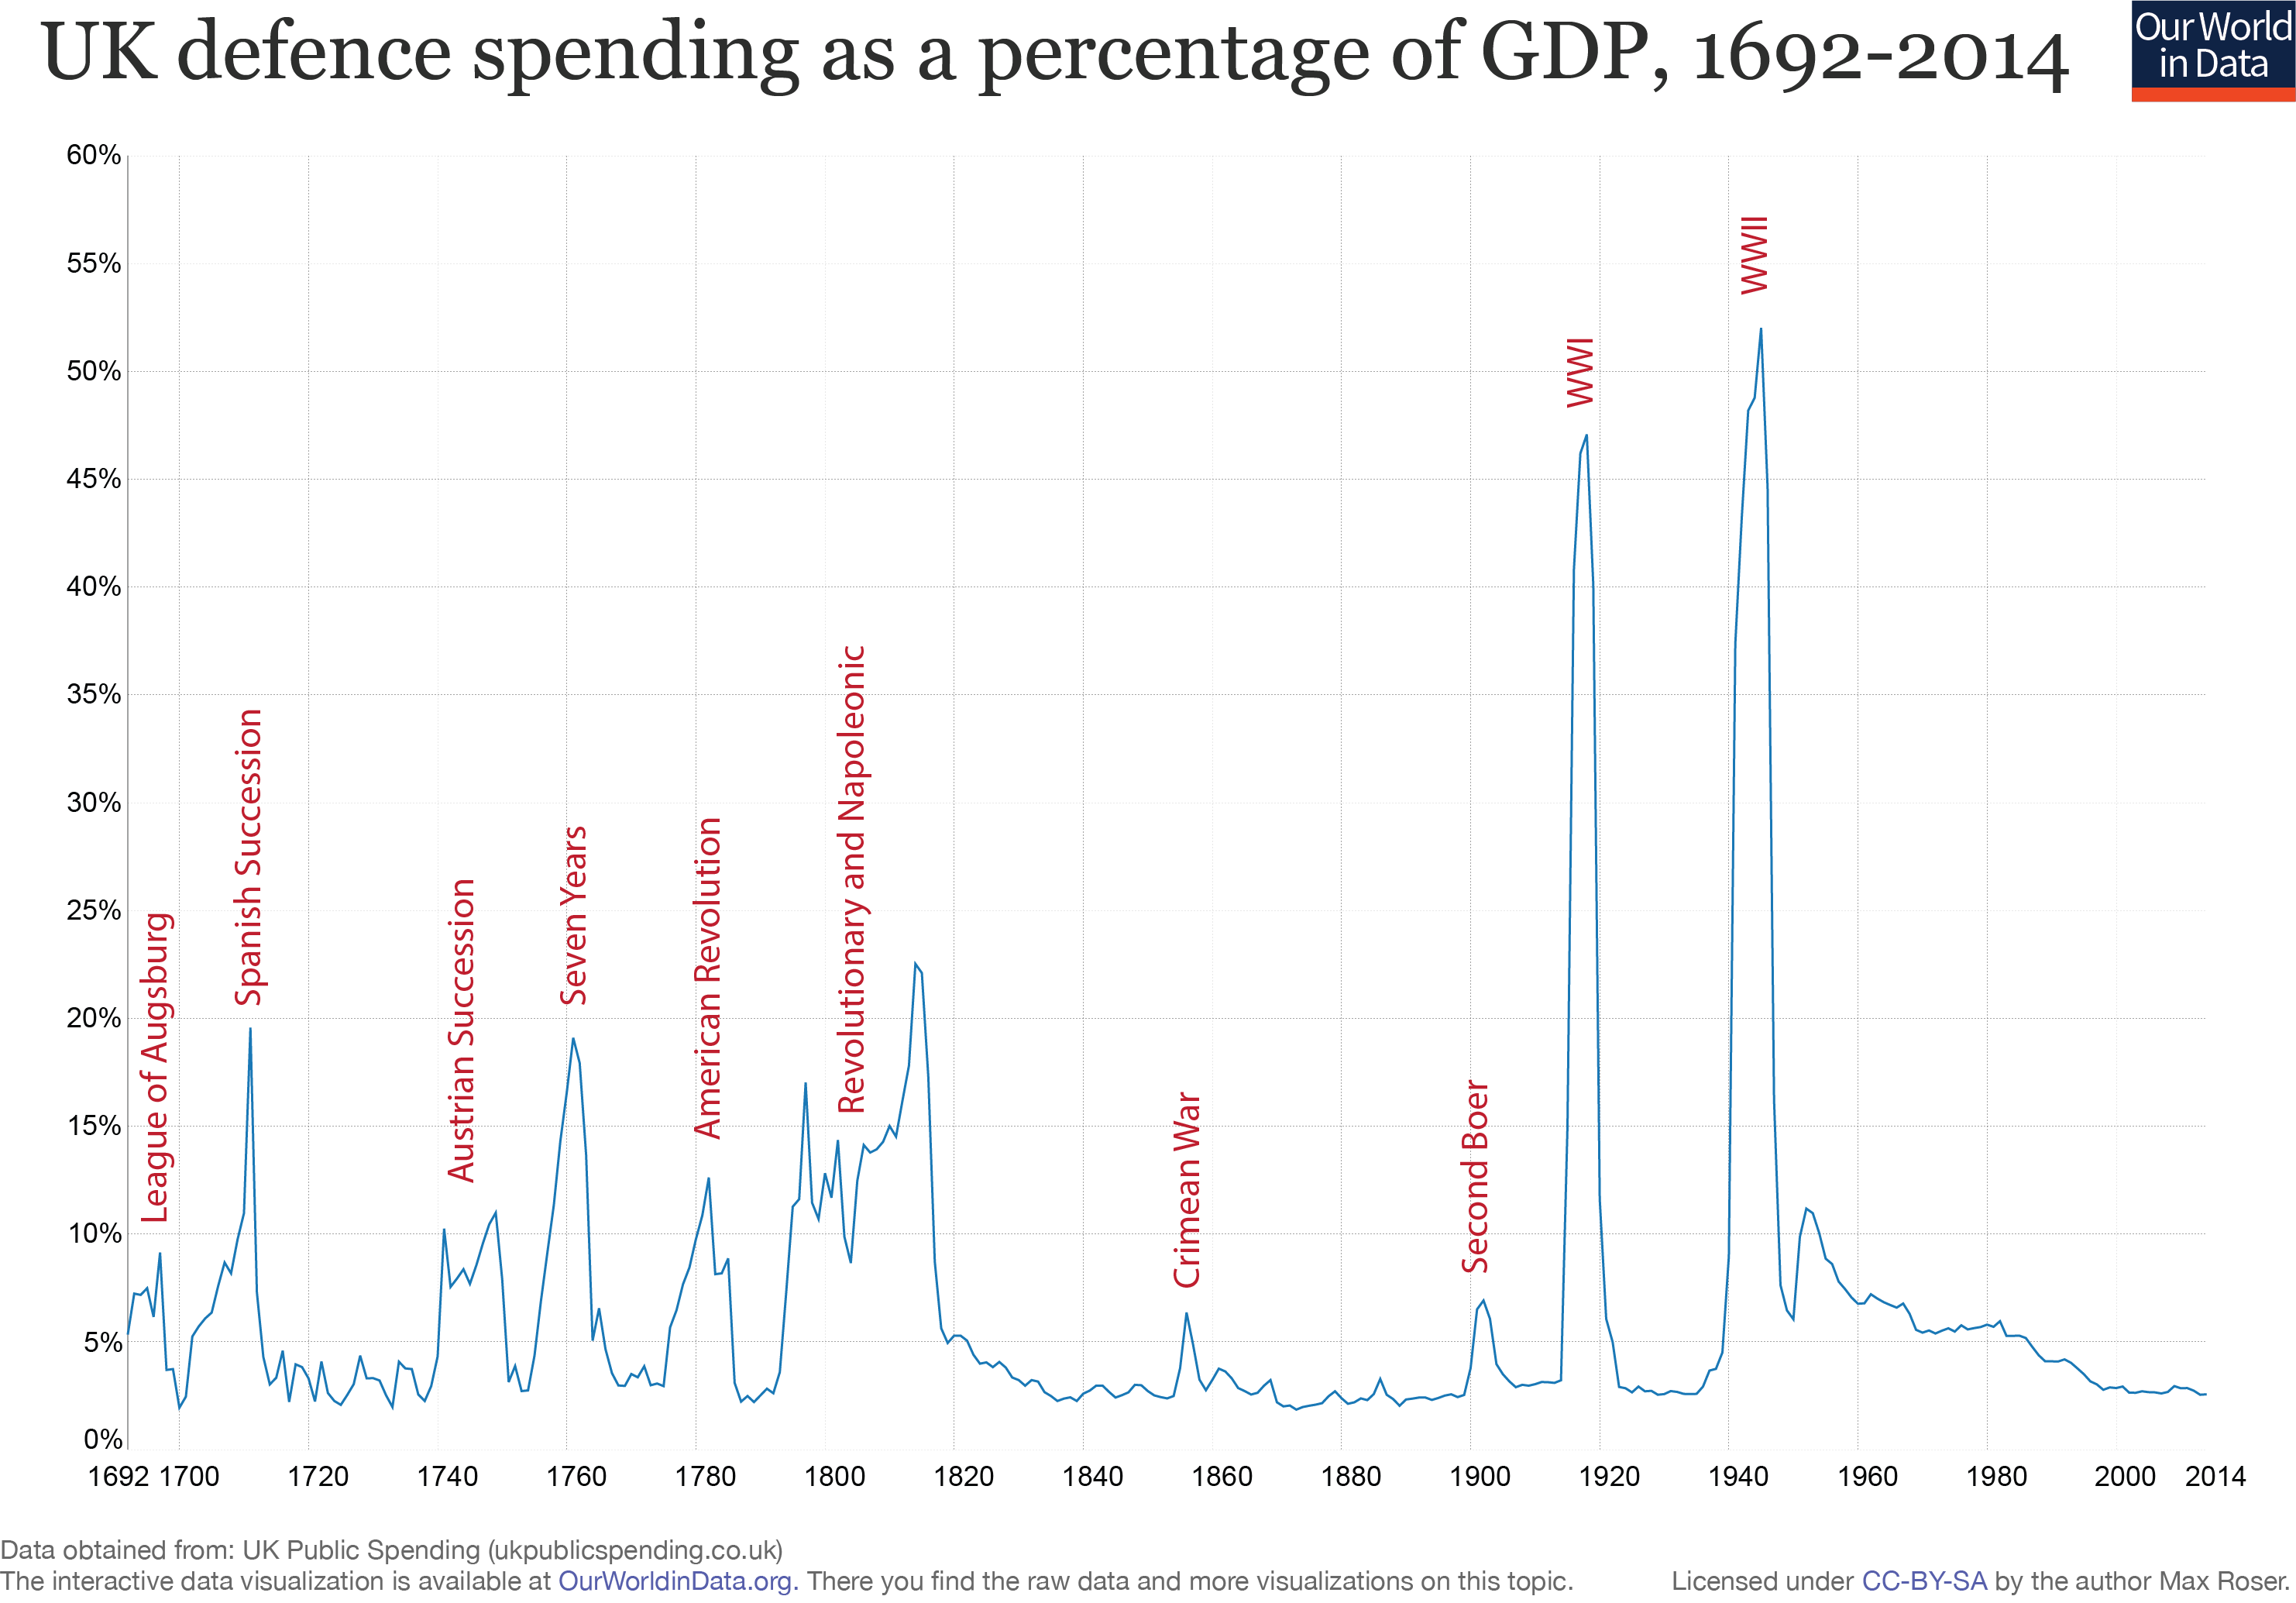 ourworldindata_uk-defence-spending-as-a-percentage-of-gdp.png